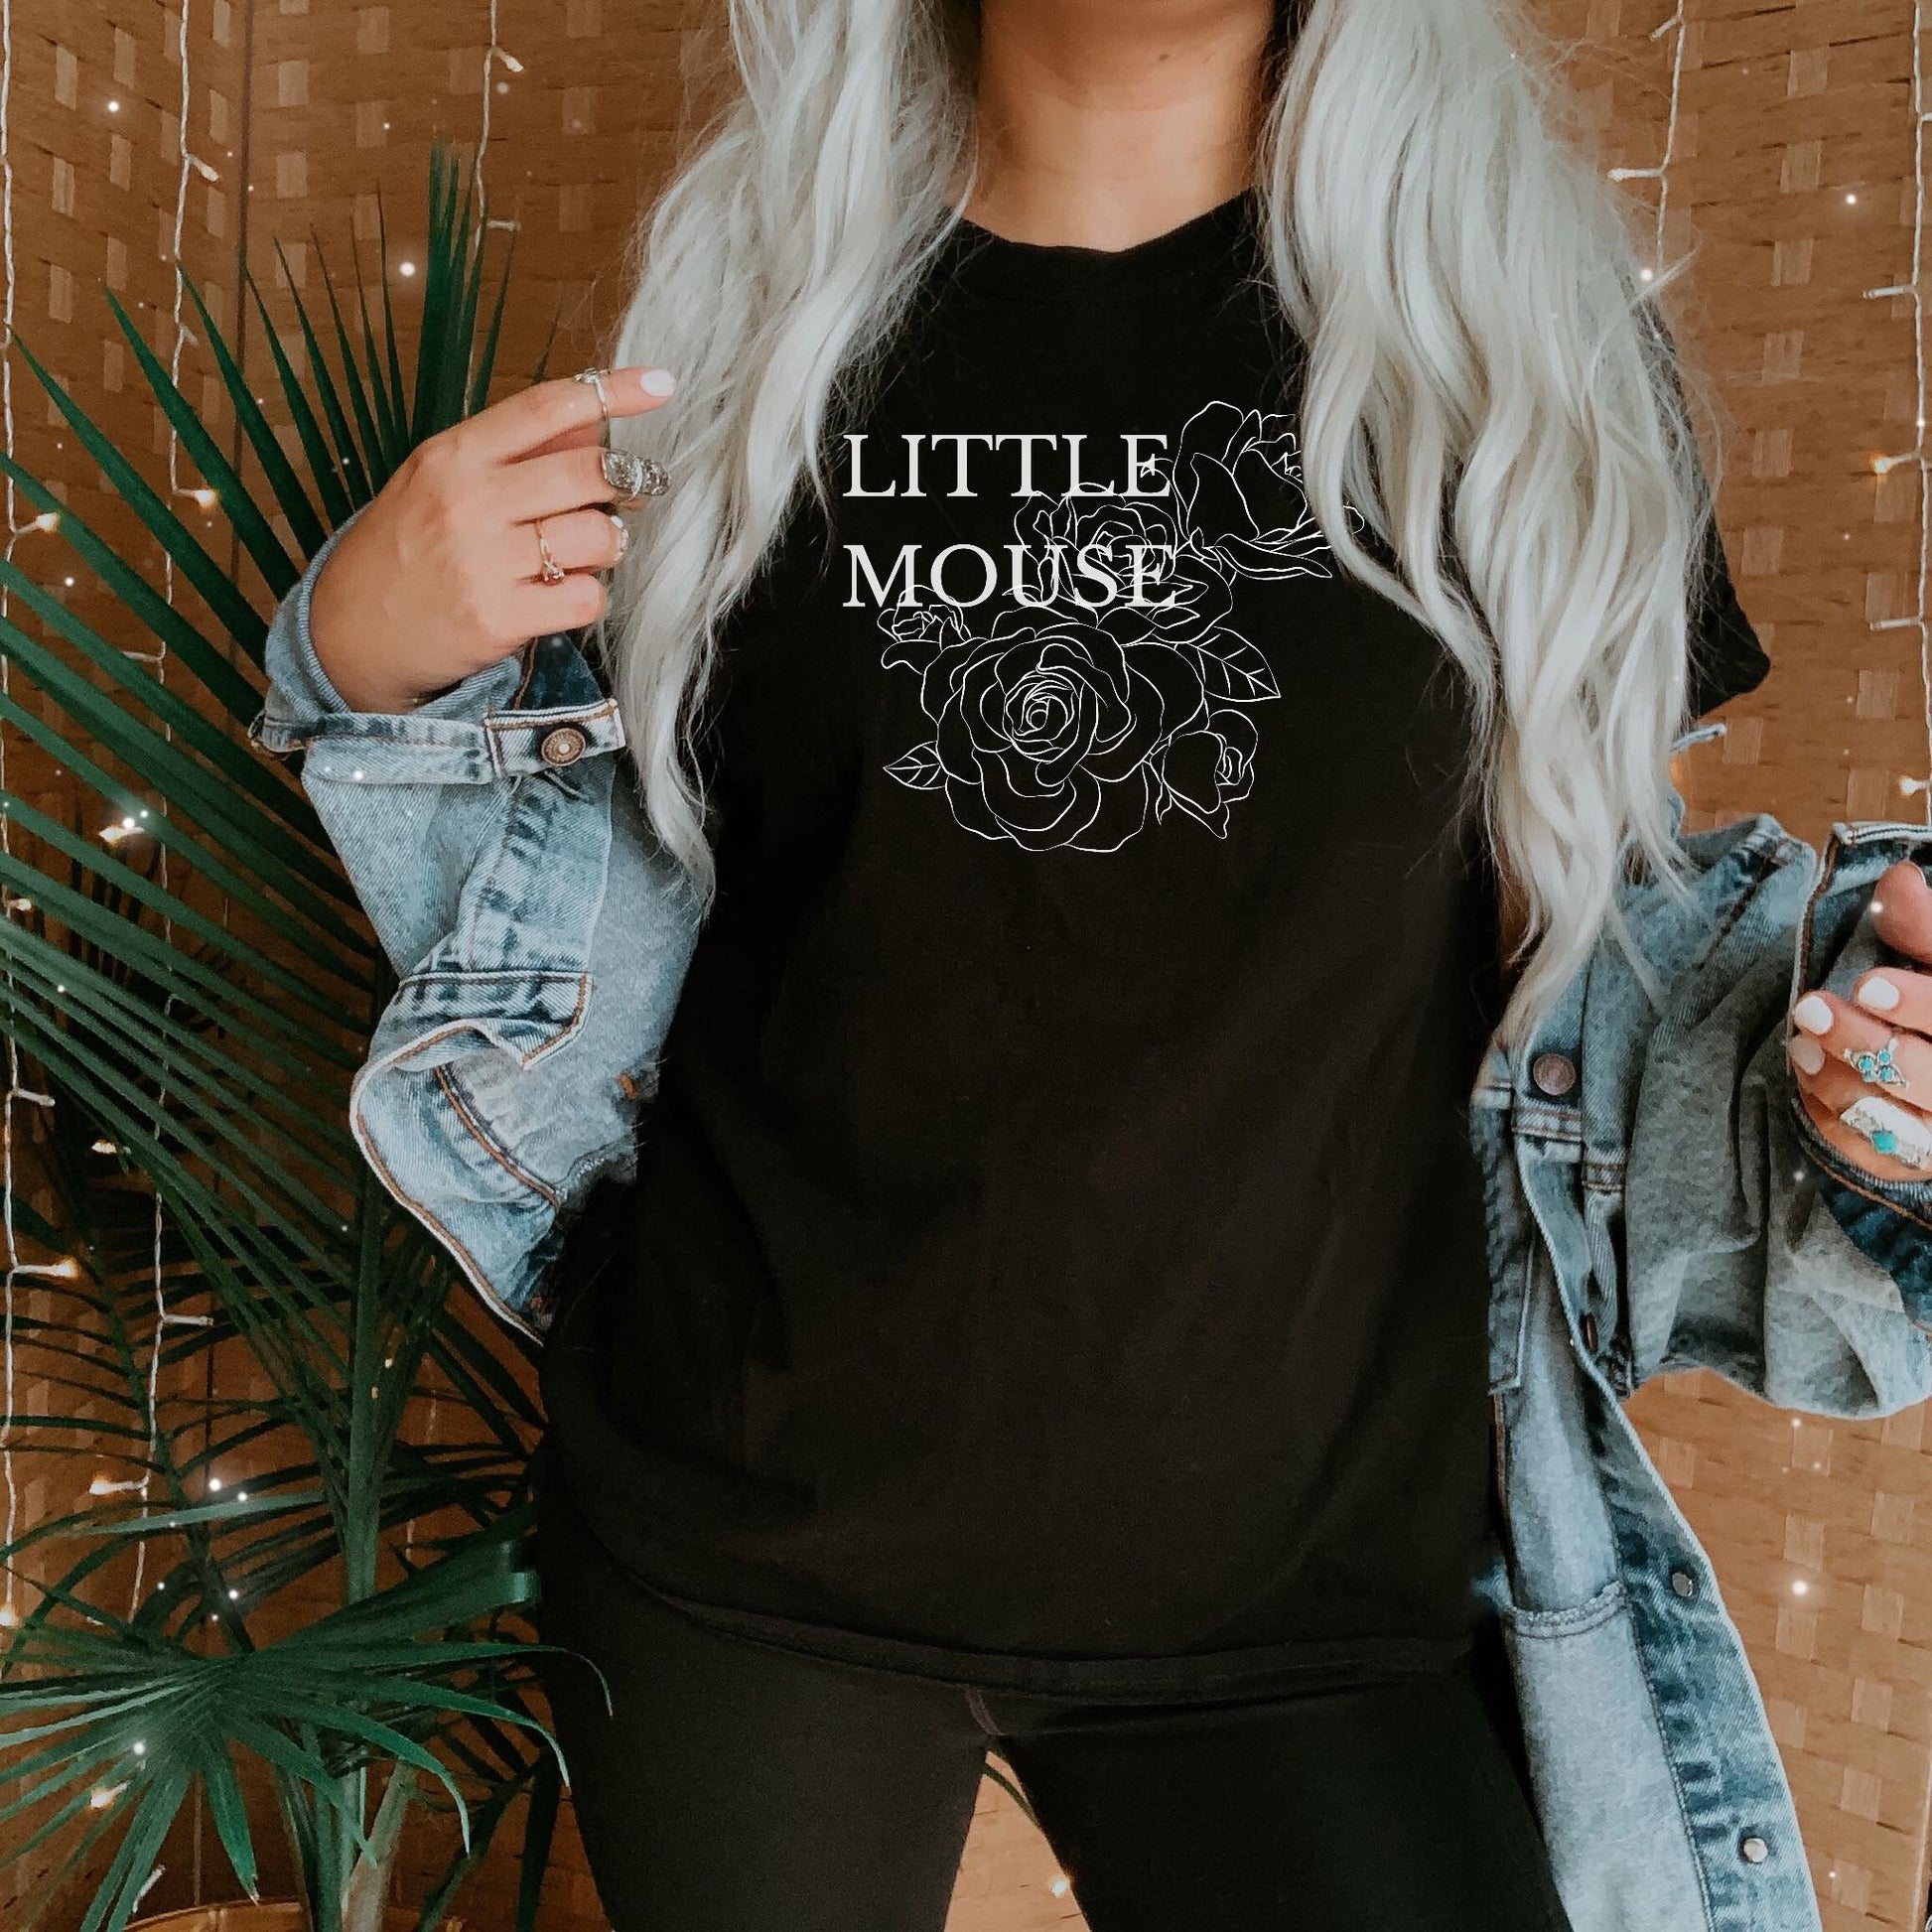 Romantasy – design. and with Haunting t-shirt rose Mouse Adeline Designs inspired Little